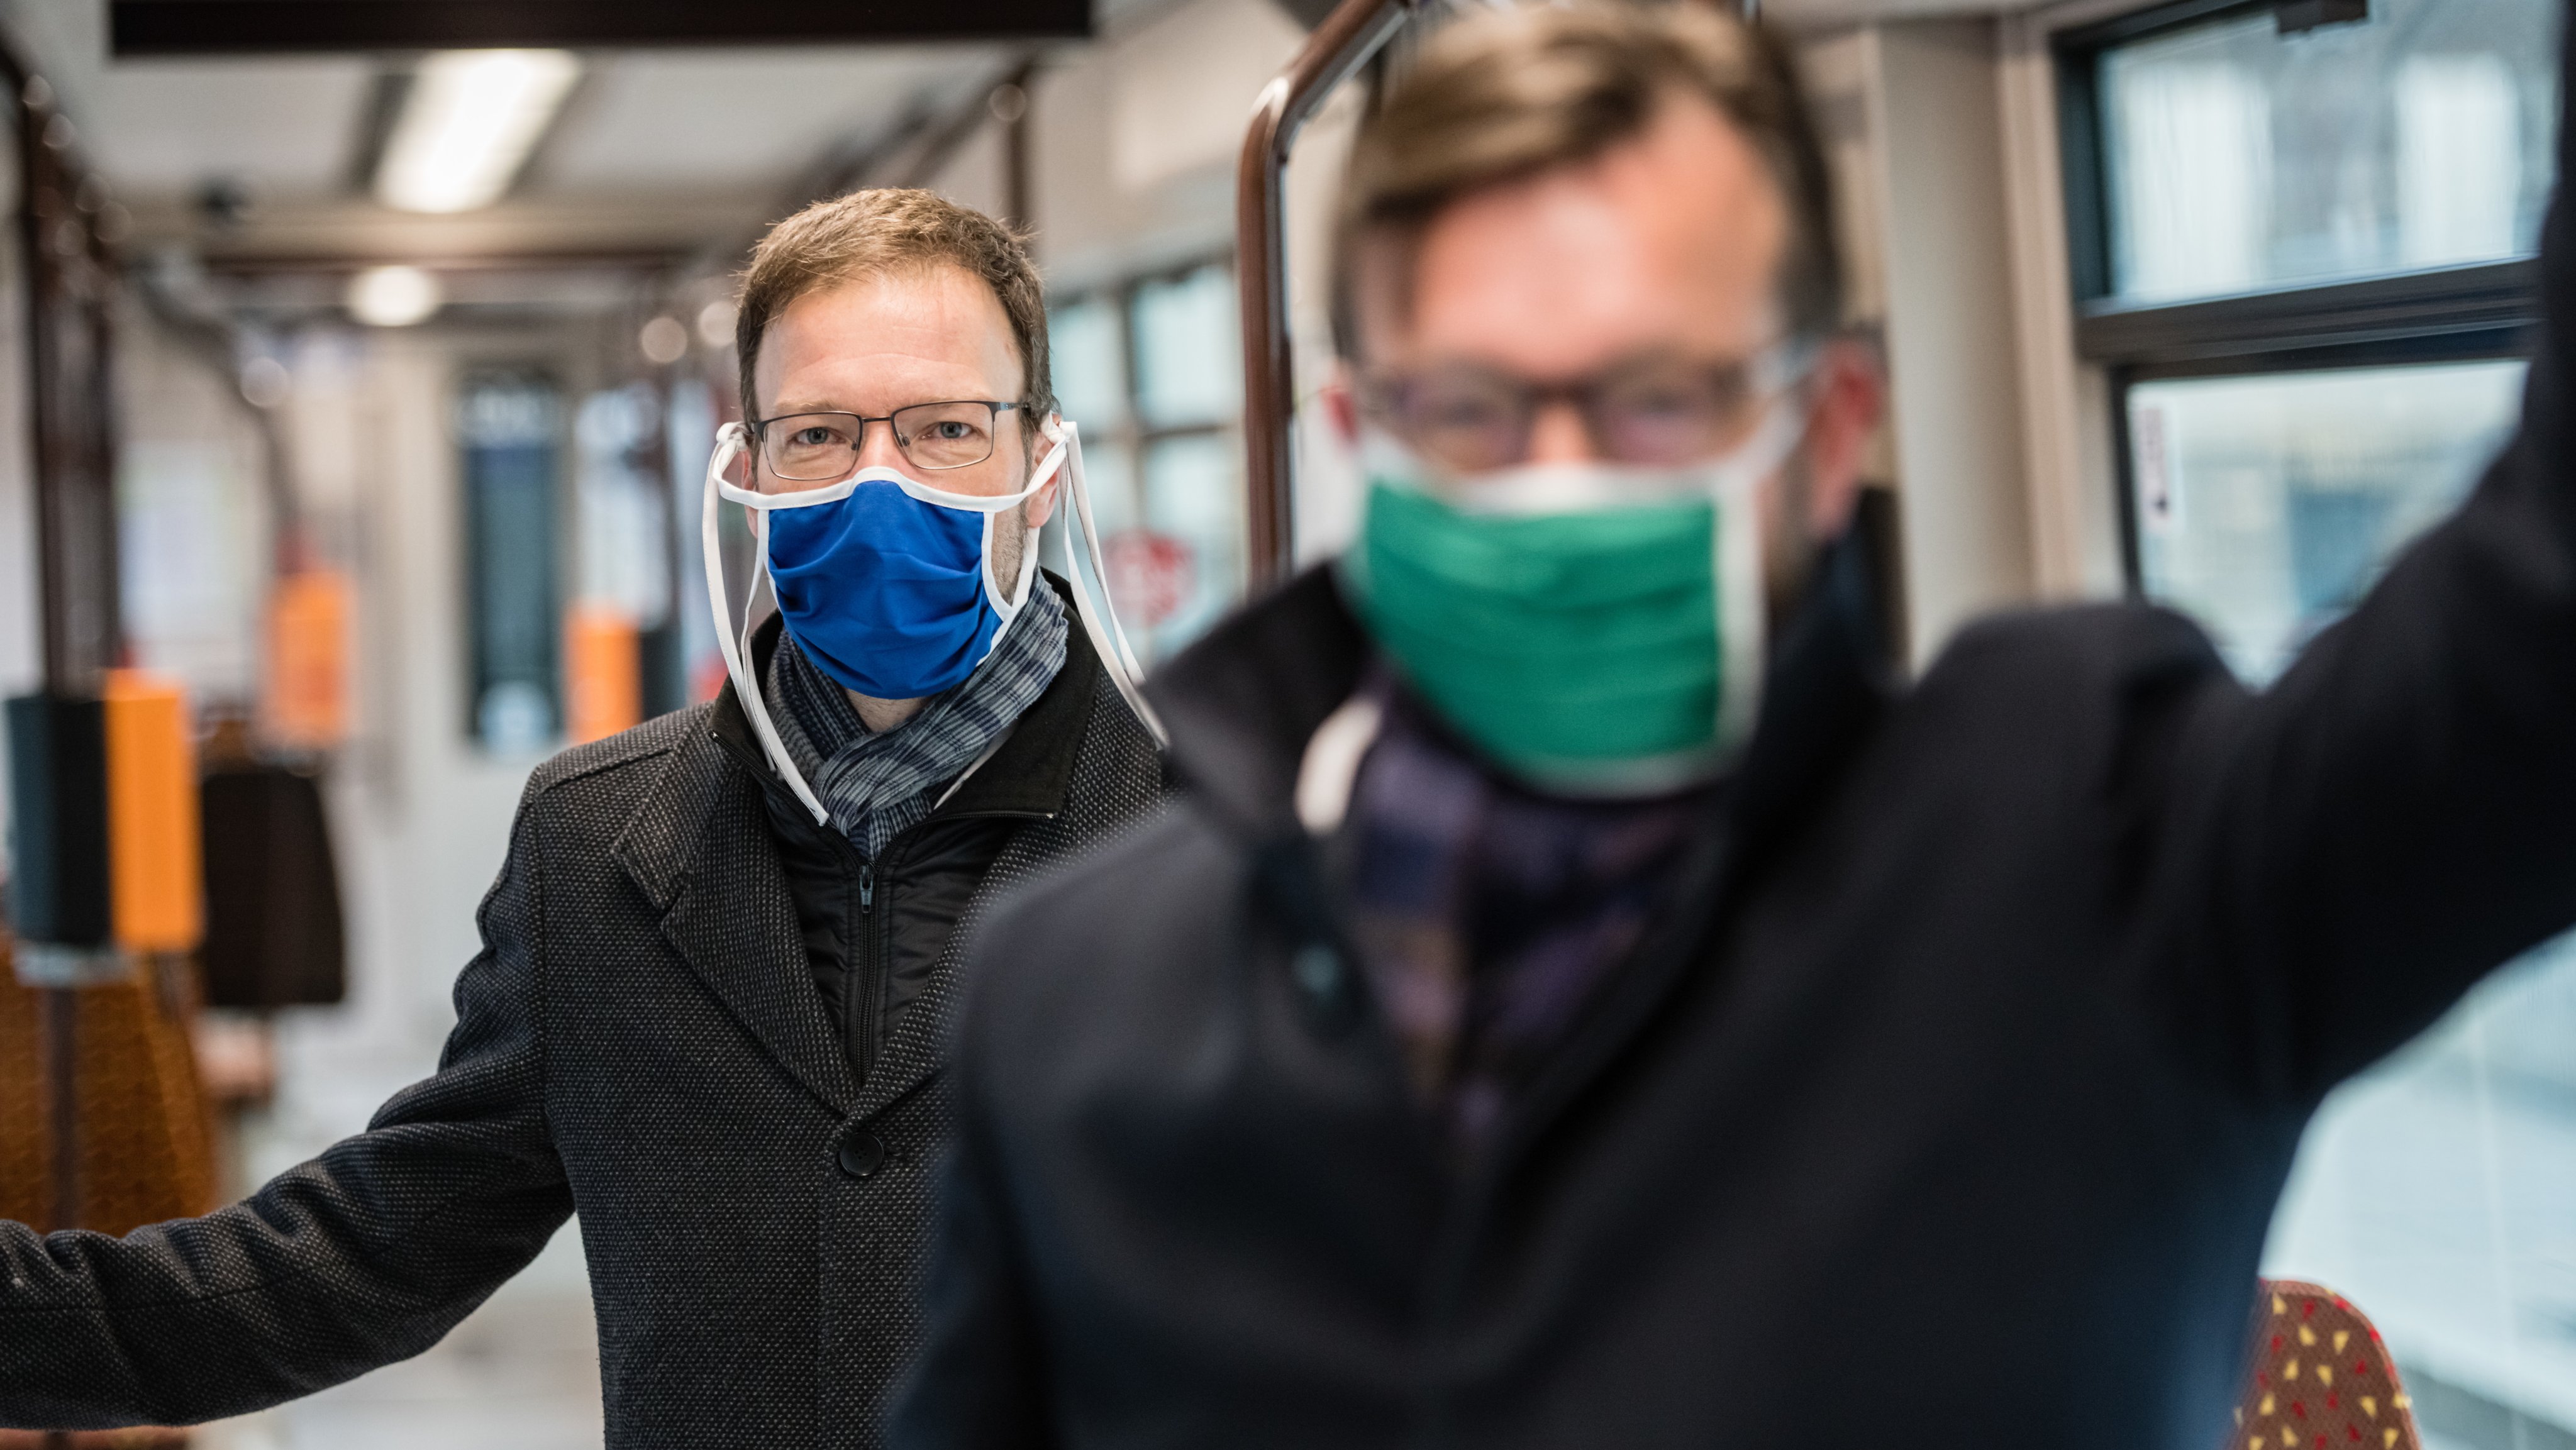 Jena To Introduces Face Mask Requirement During Coronavirus Crisis